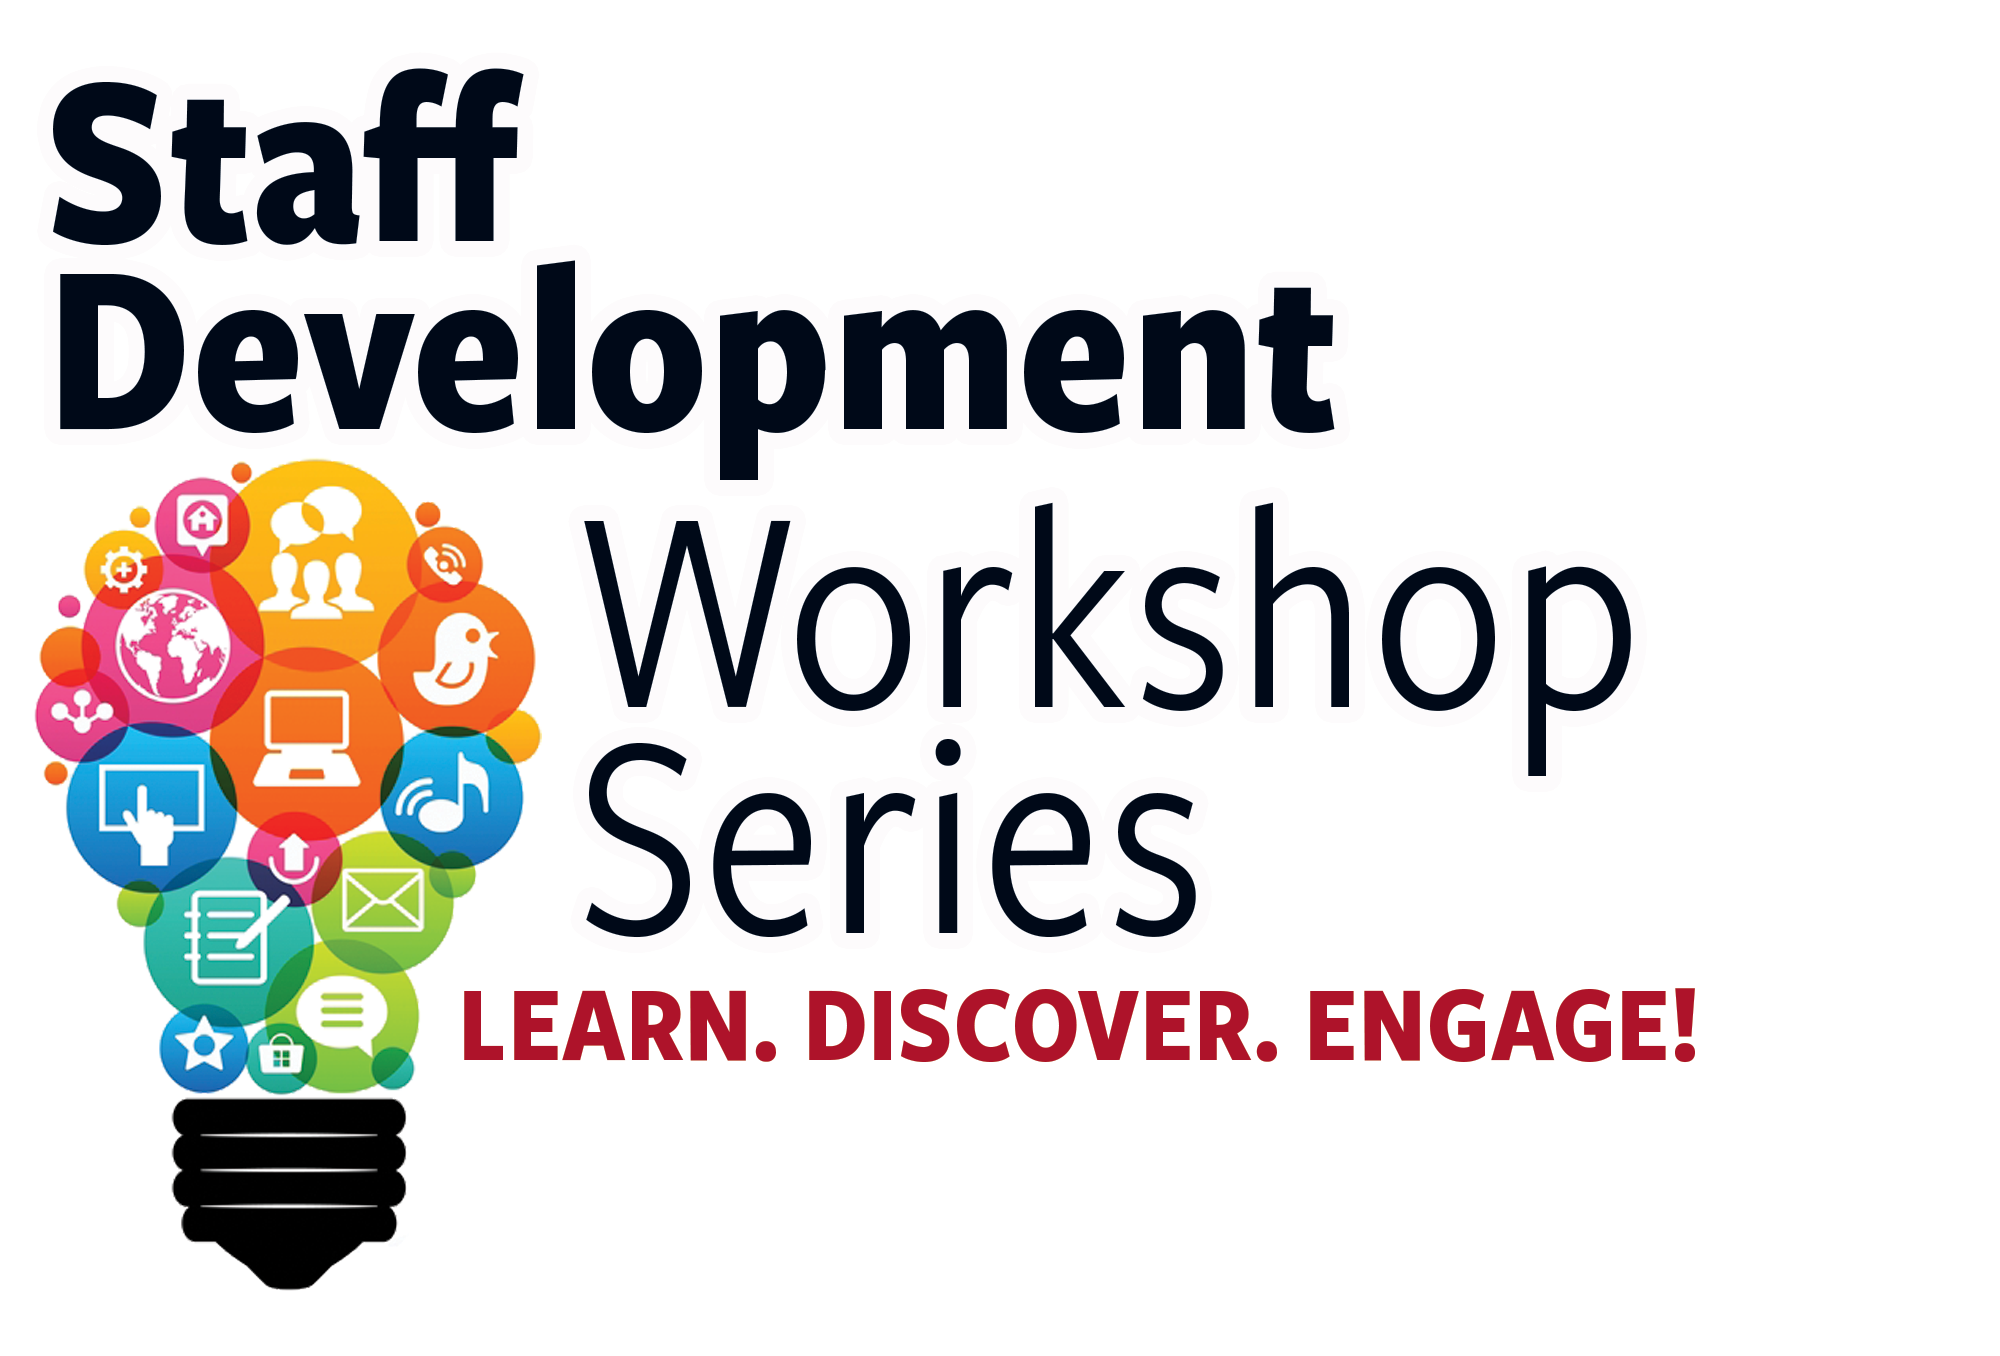 staff development workshop series: learn, something, engage; colorful icons in shape of a lightbulb